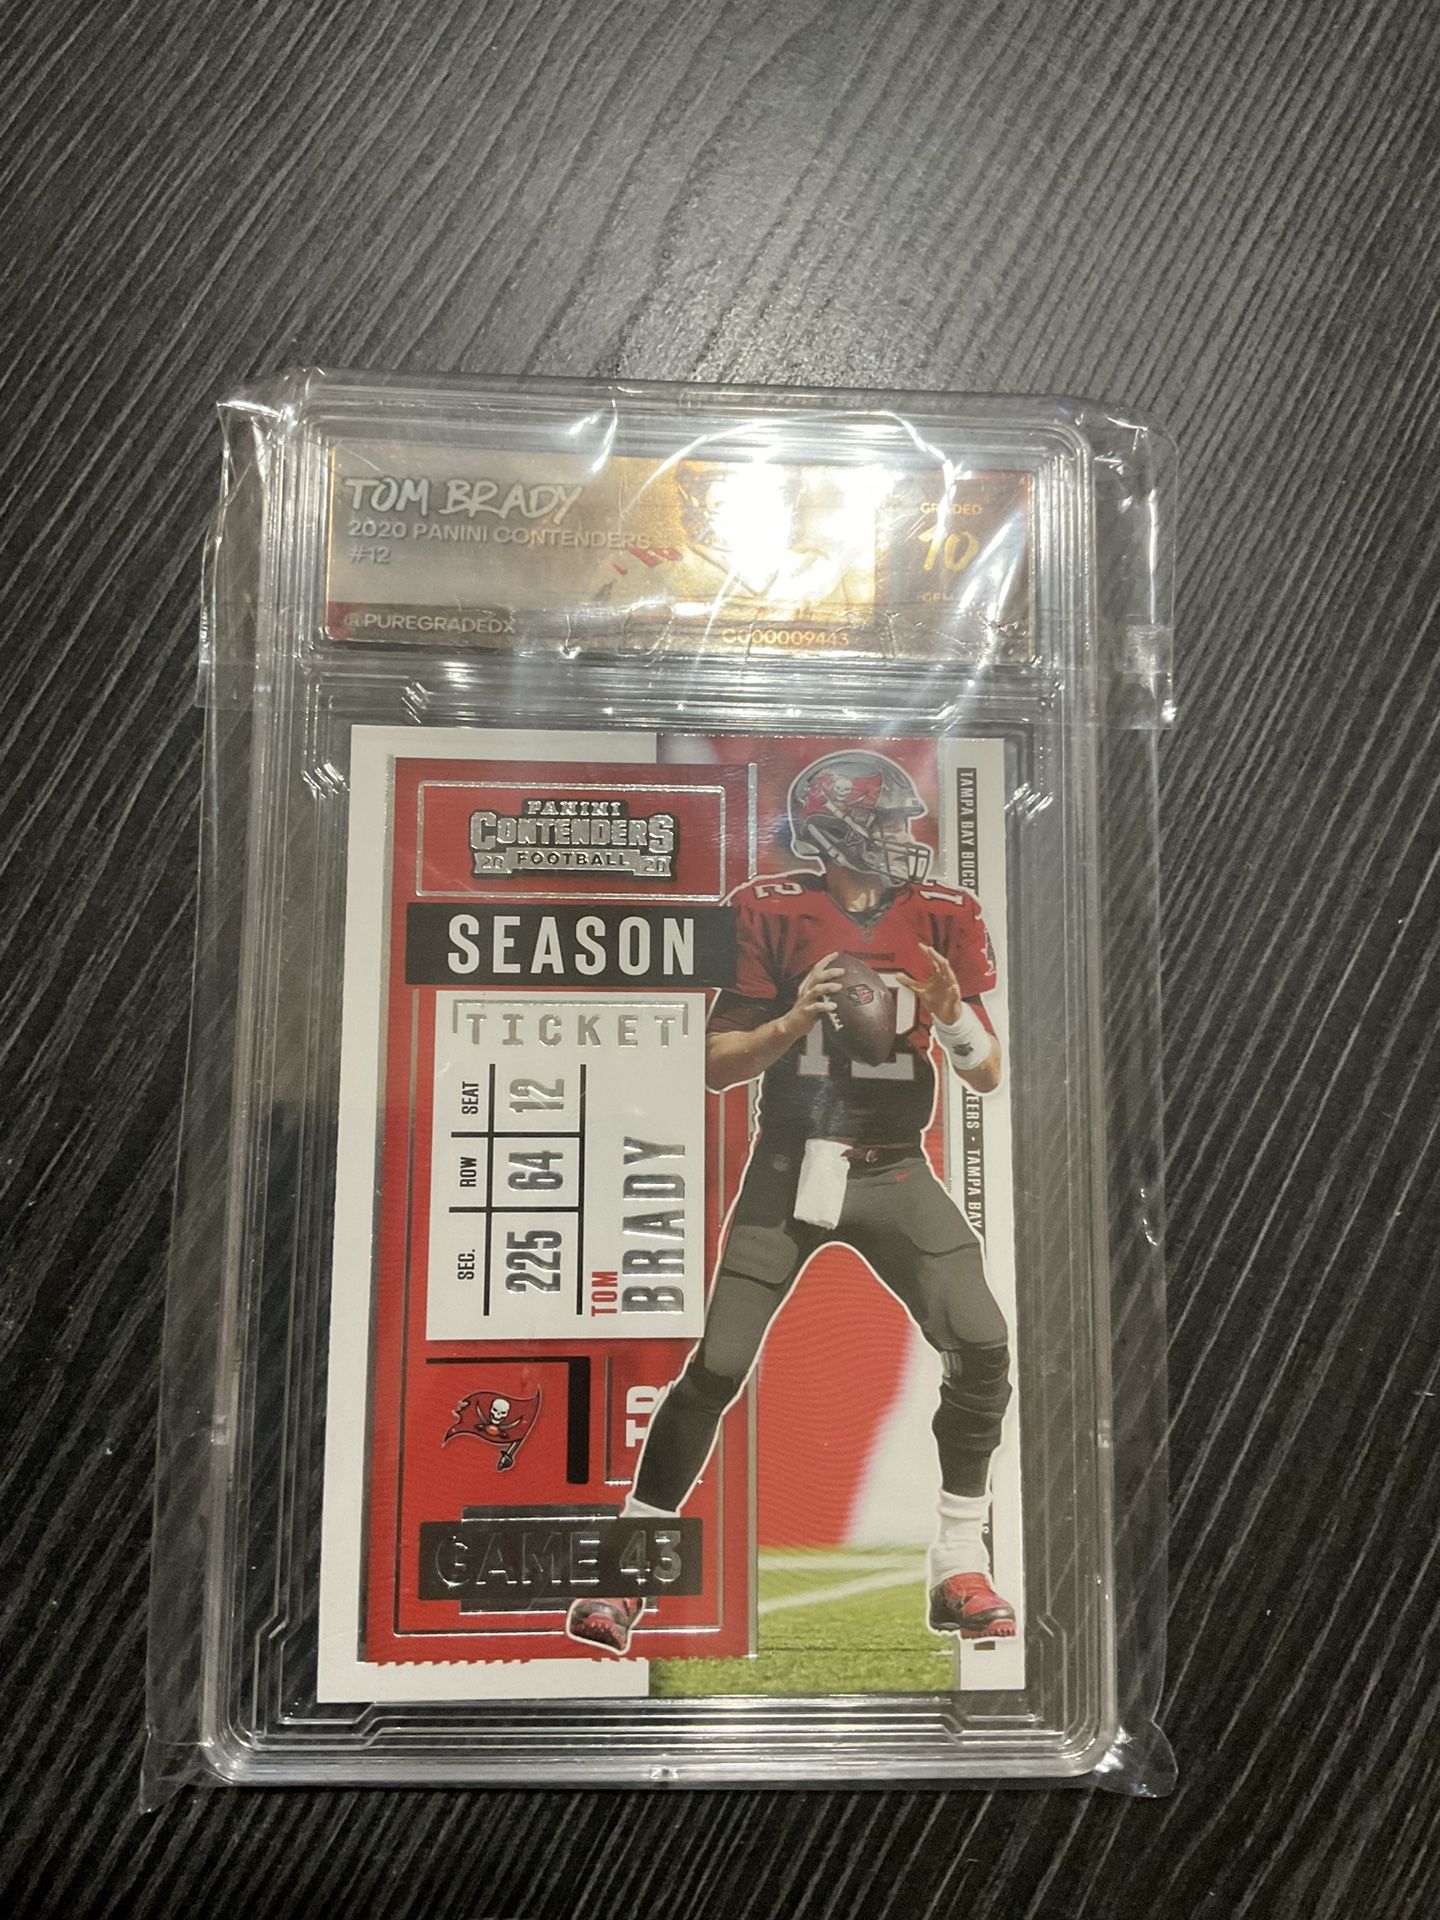 Professionally Graded 2020 Contenders Tom Brady Football Card Gem Mint 10 Tampa Bay Buccaneers GOAT 